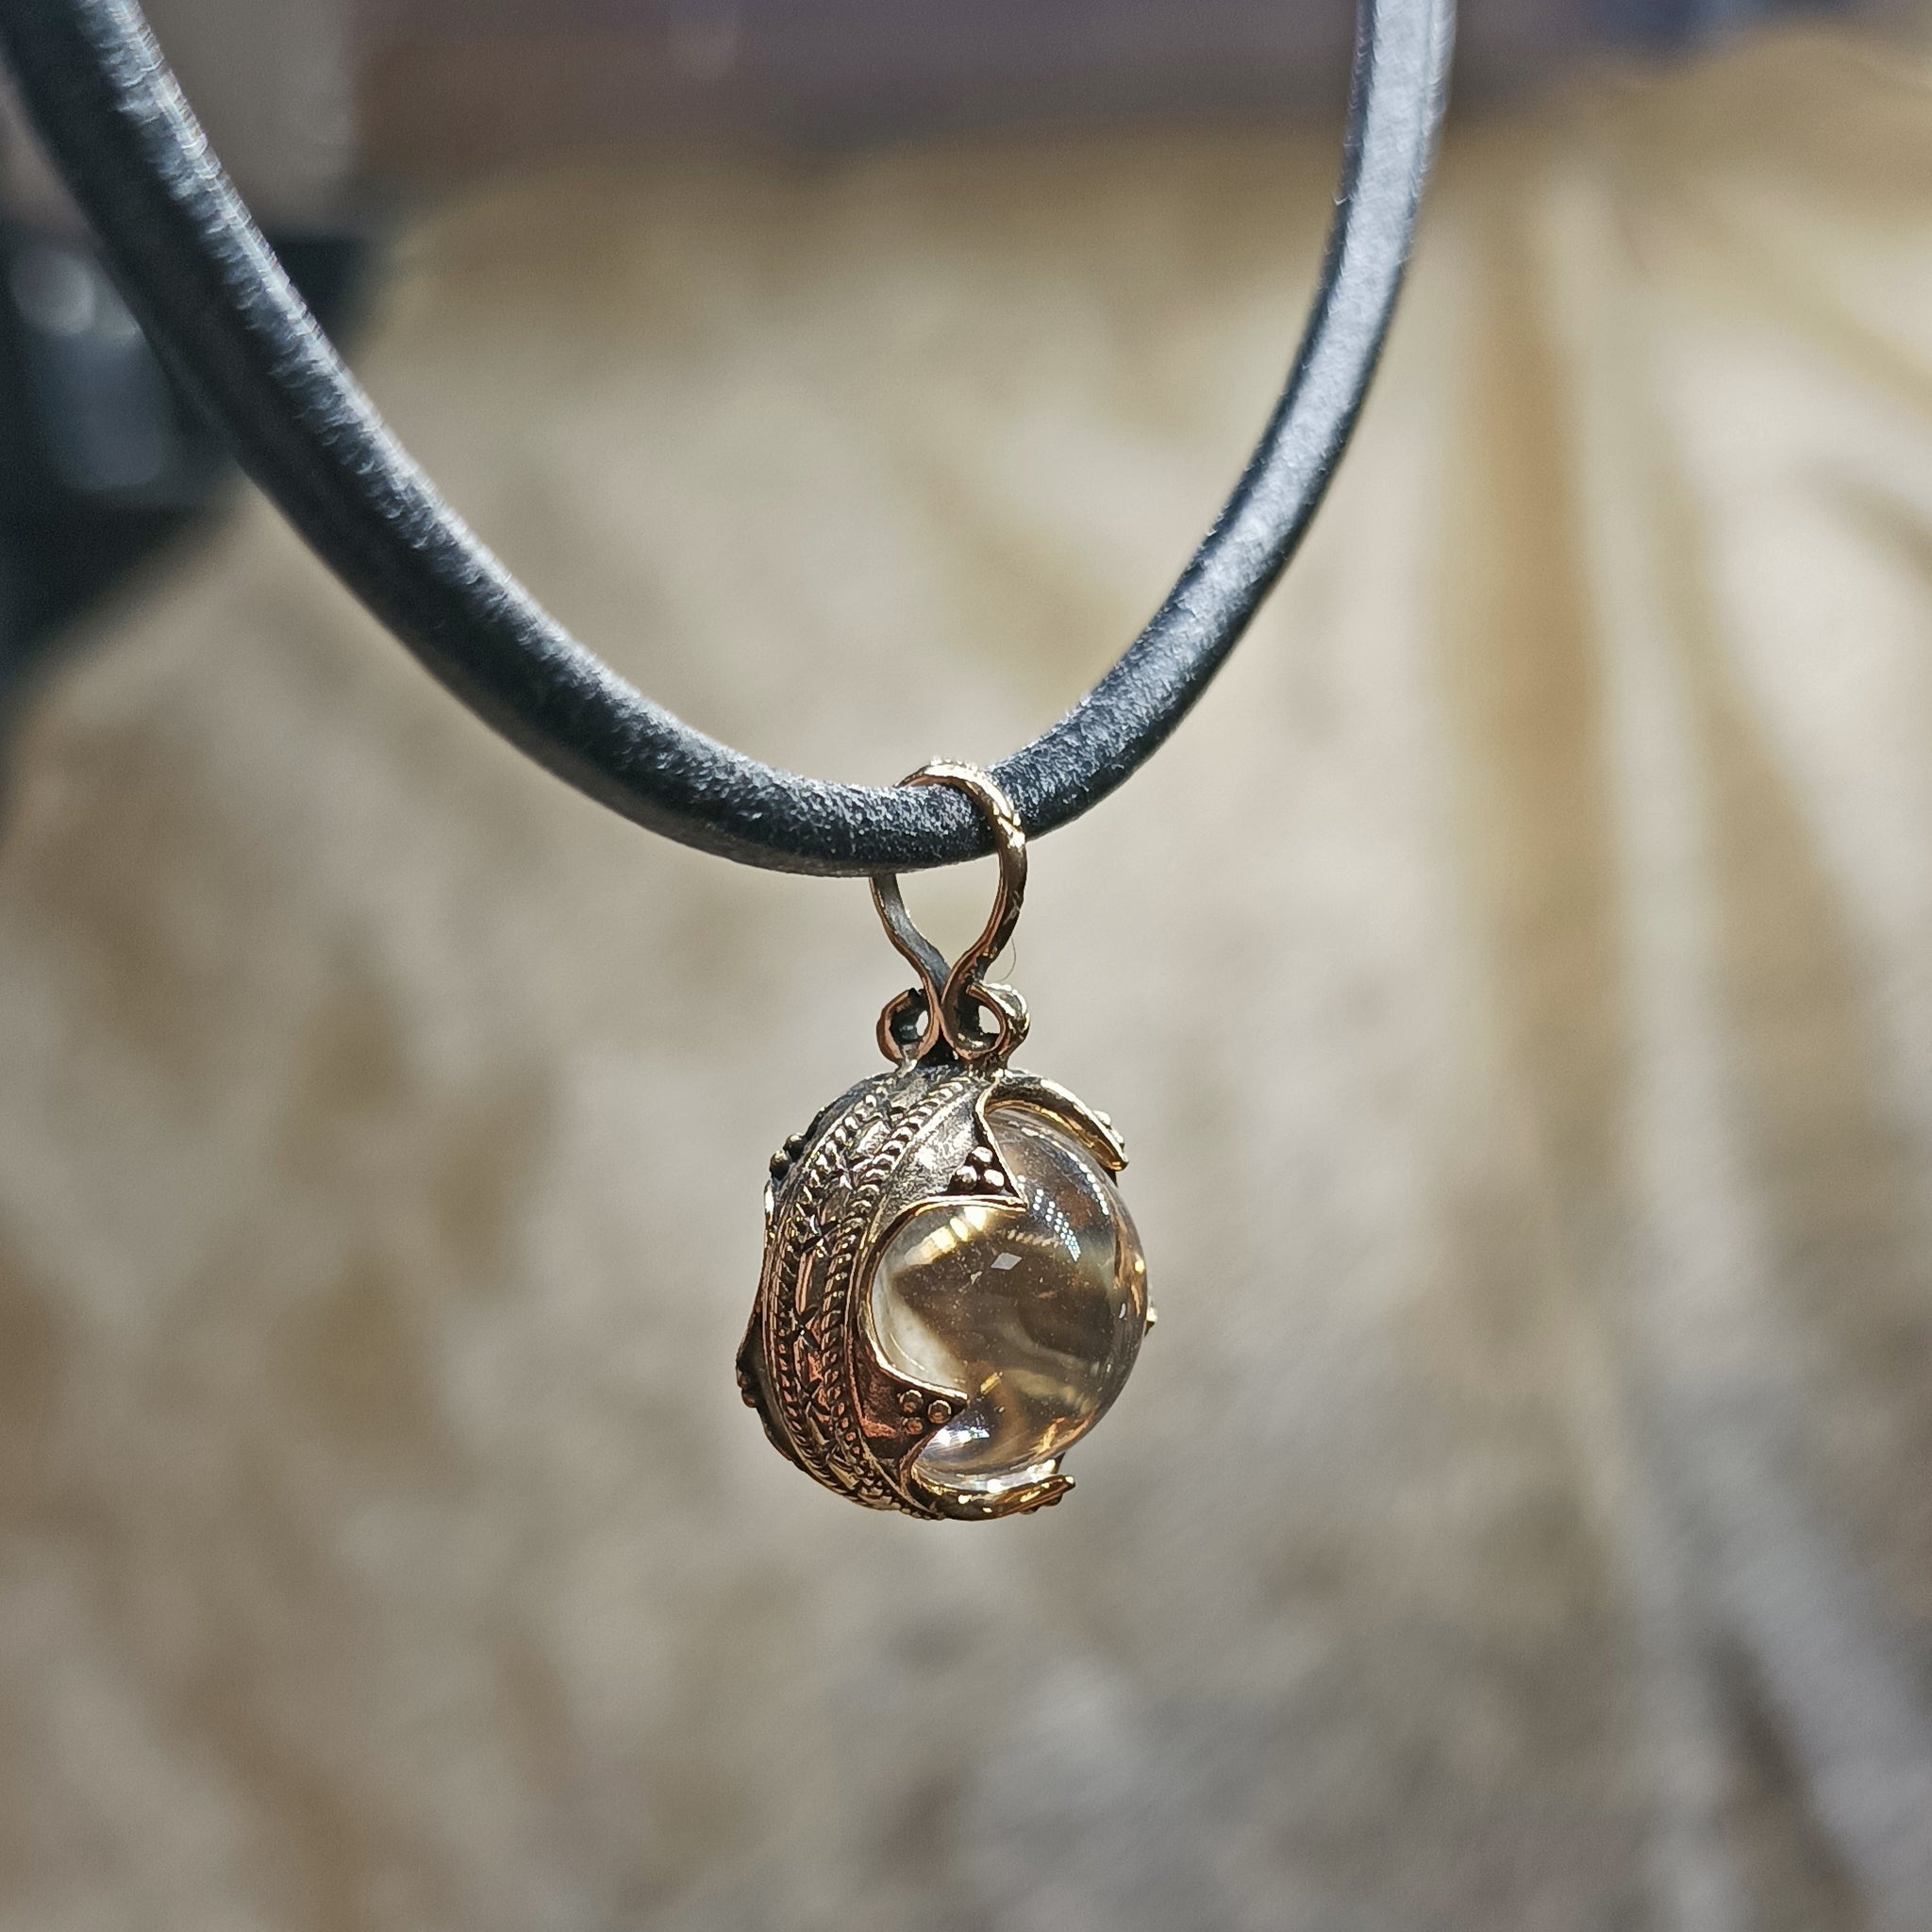 Small Bronze Gotland Crystal Ball Pendant on Leather Thong - Side View